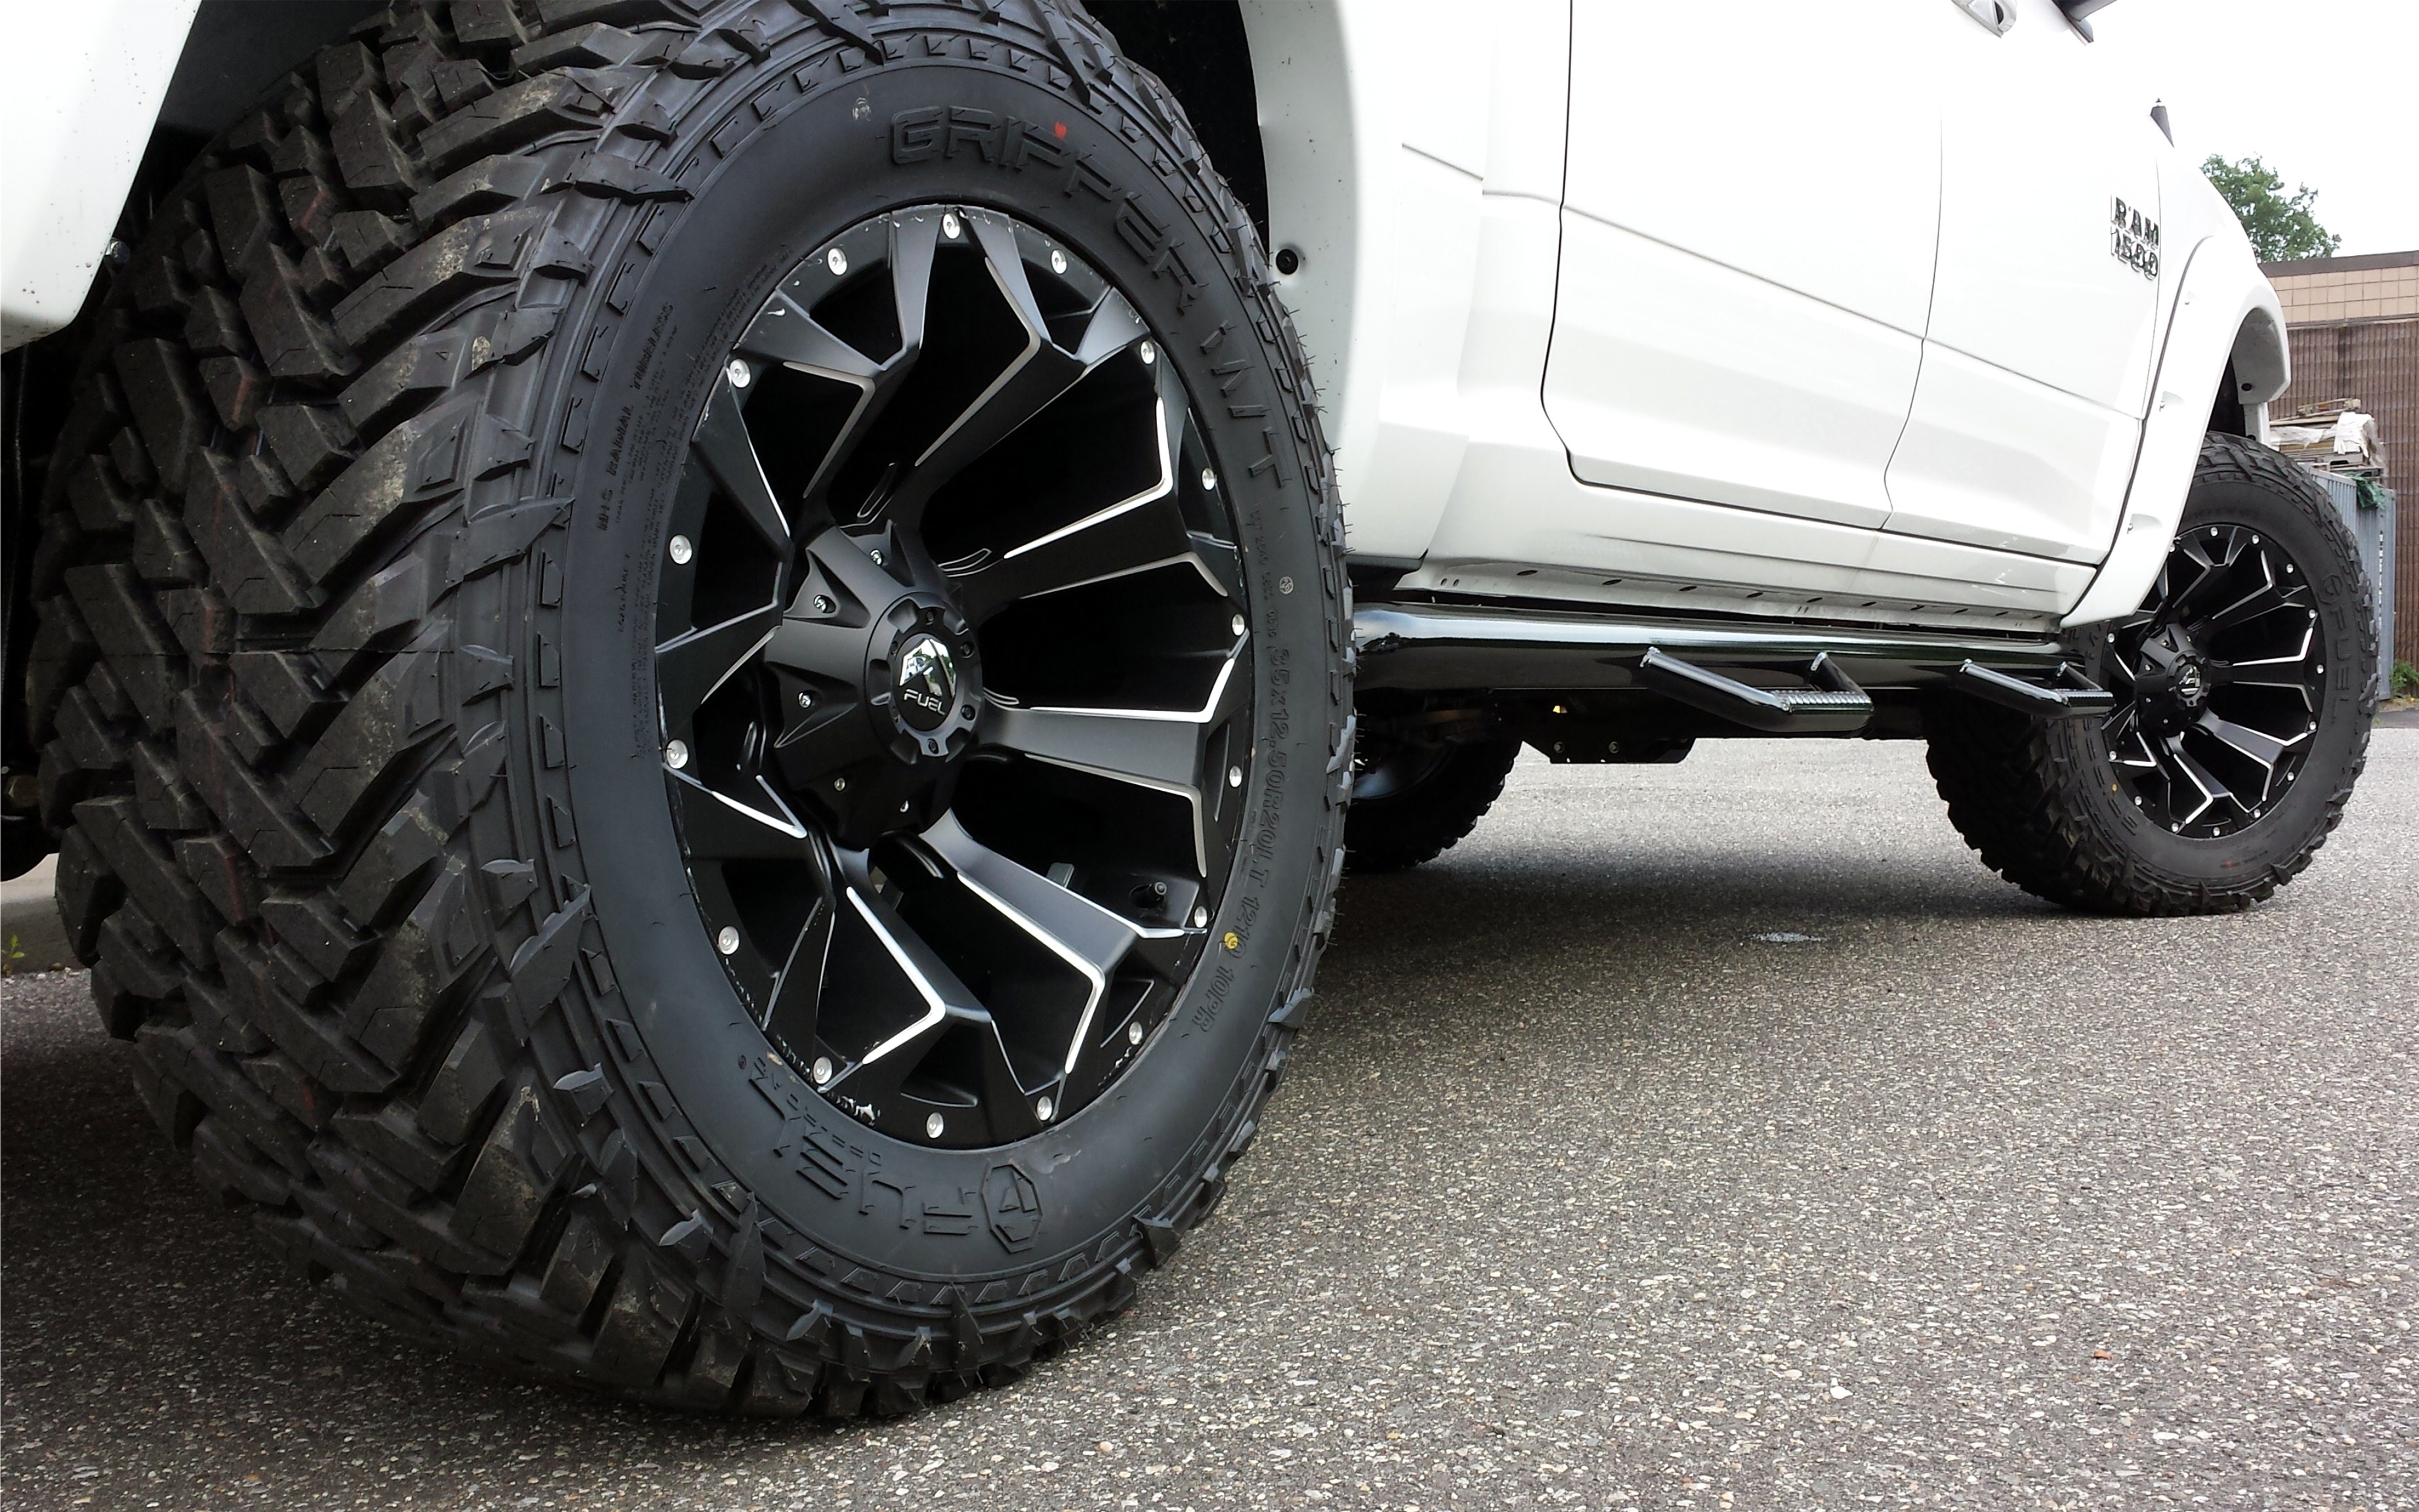 Ram wheels and big tires by Autokicks